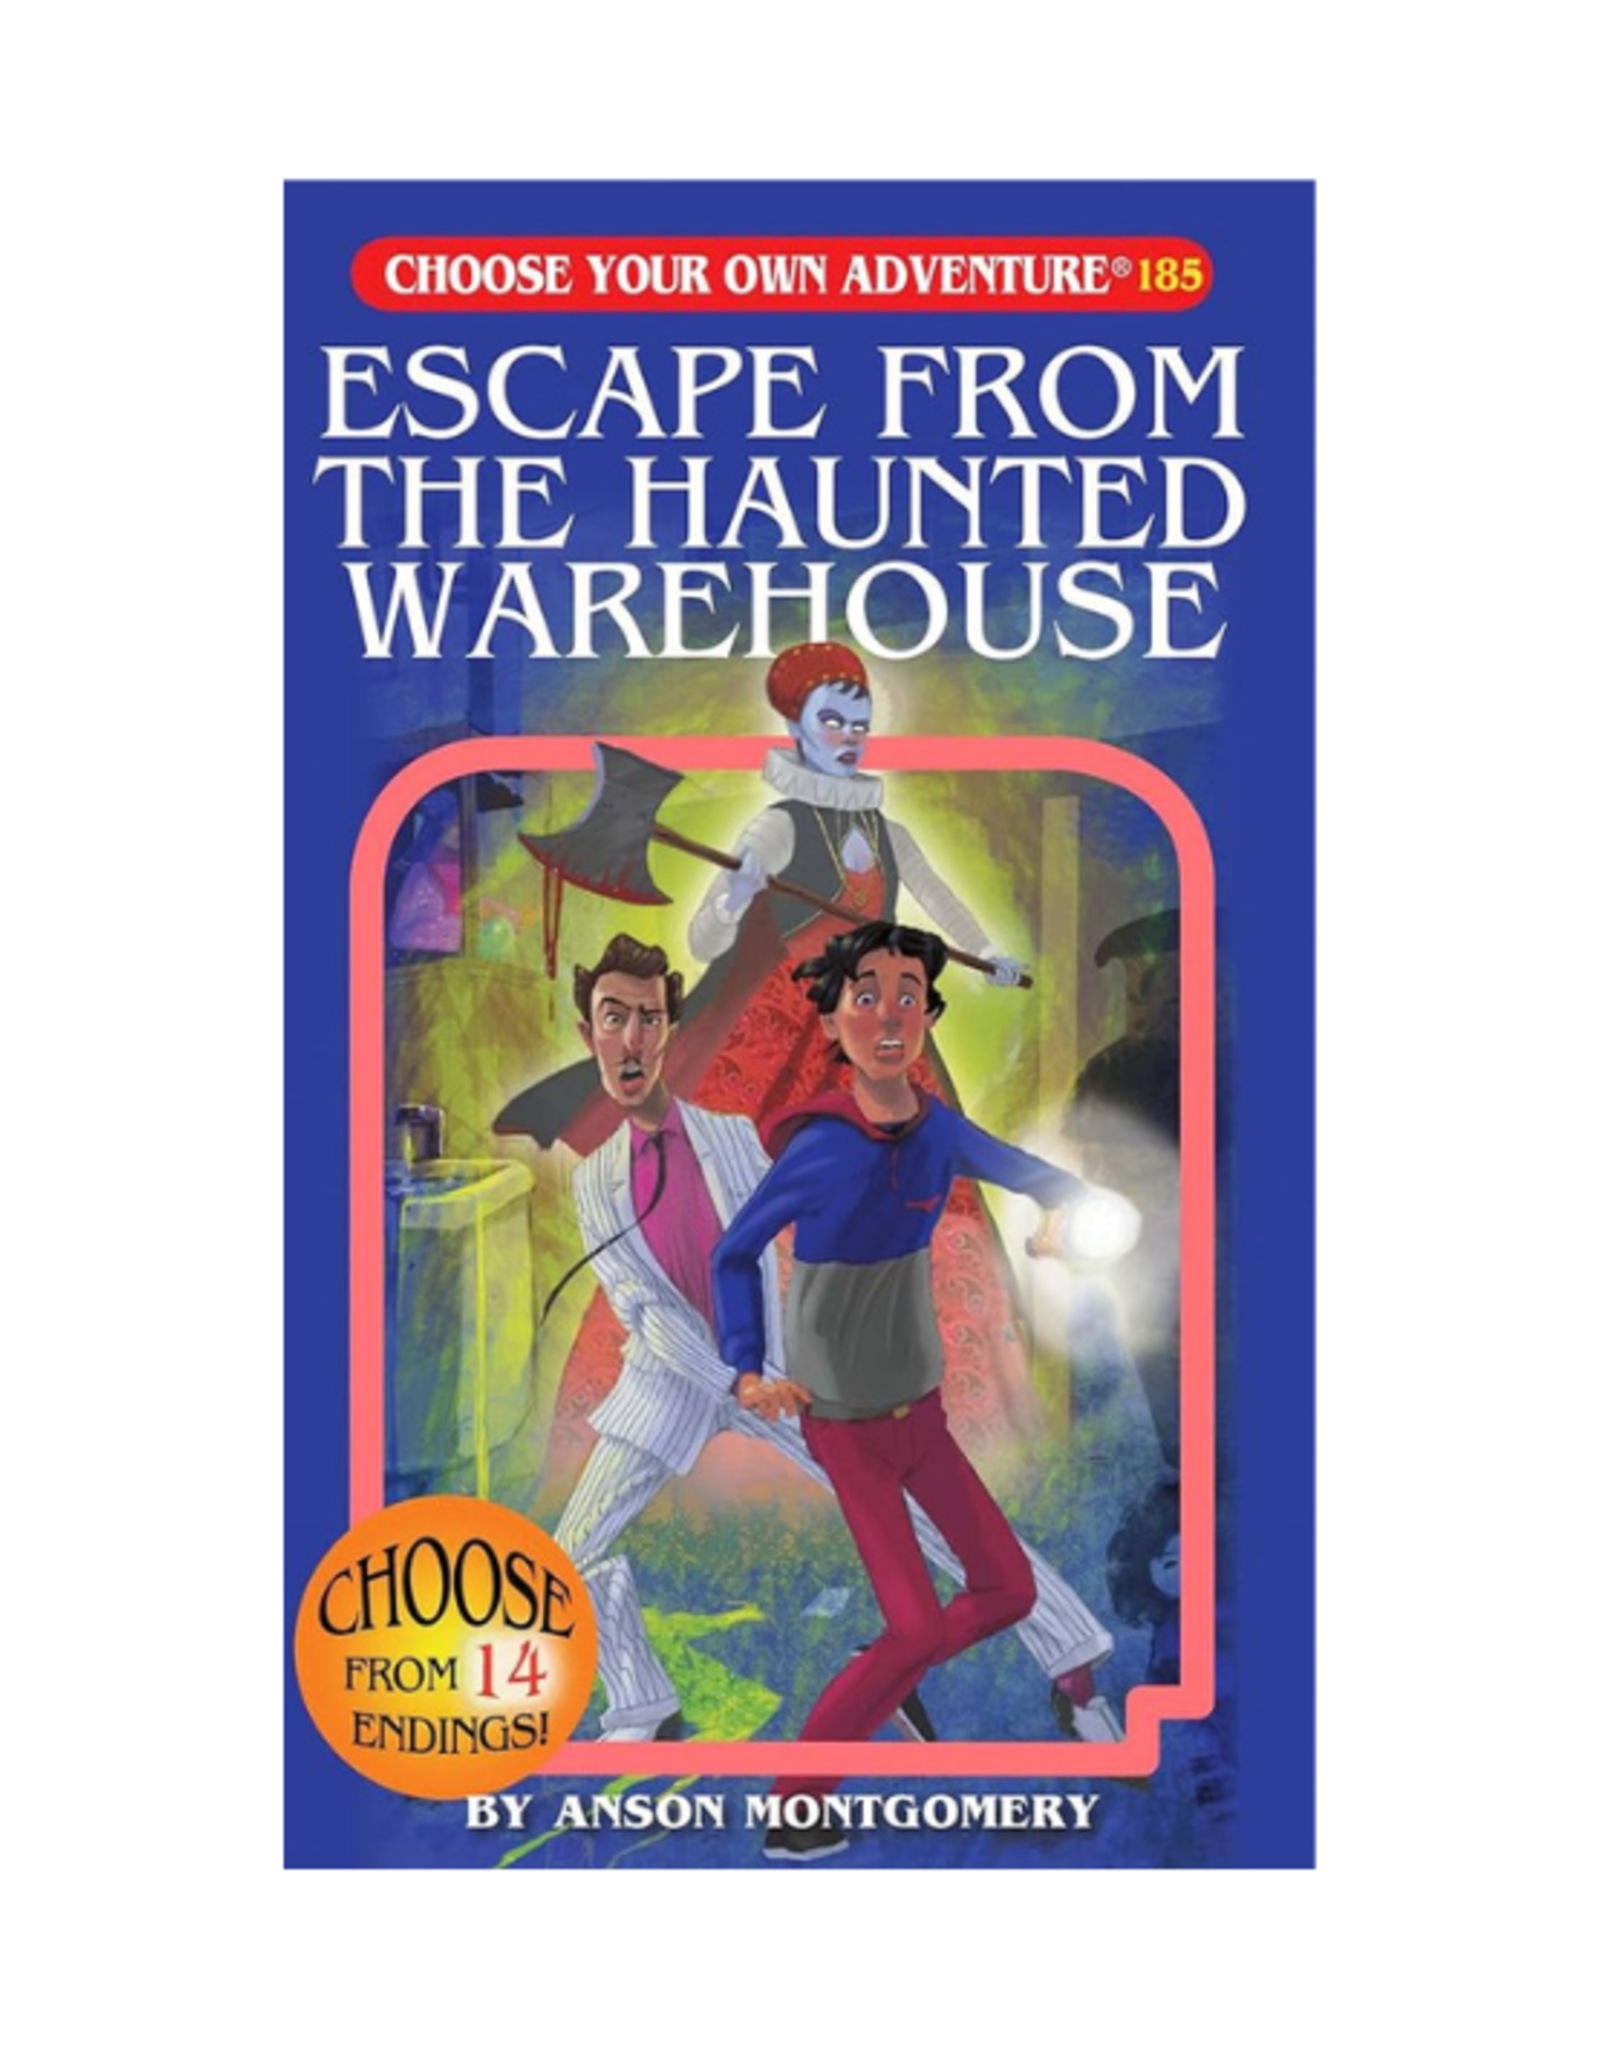 Choose Your Own Adventure Book - Choose Your Own Adventure - Escape from the Haunted Warehouse